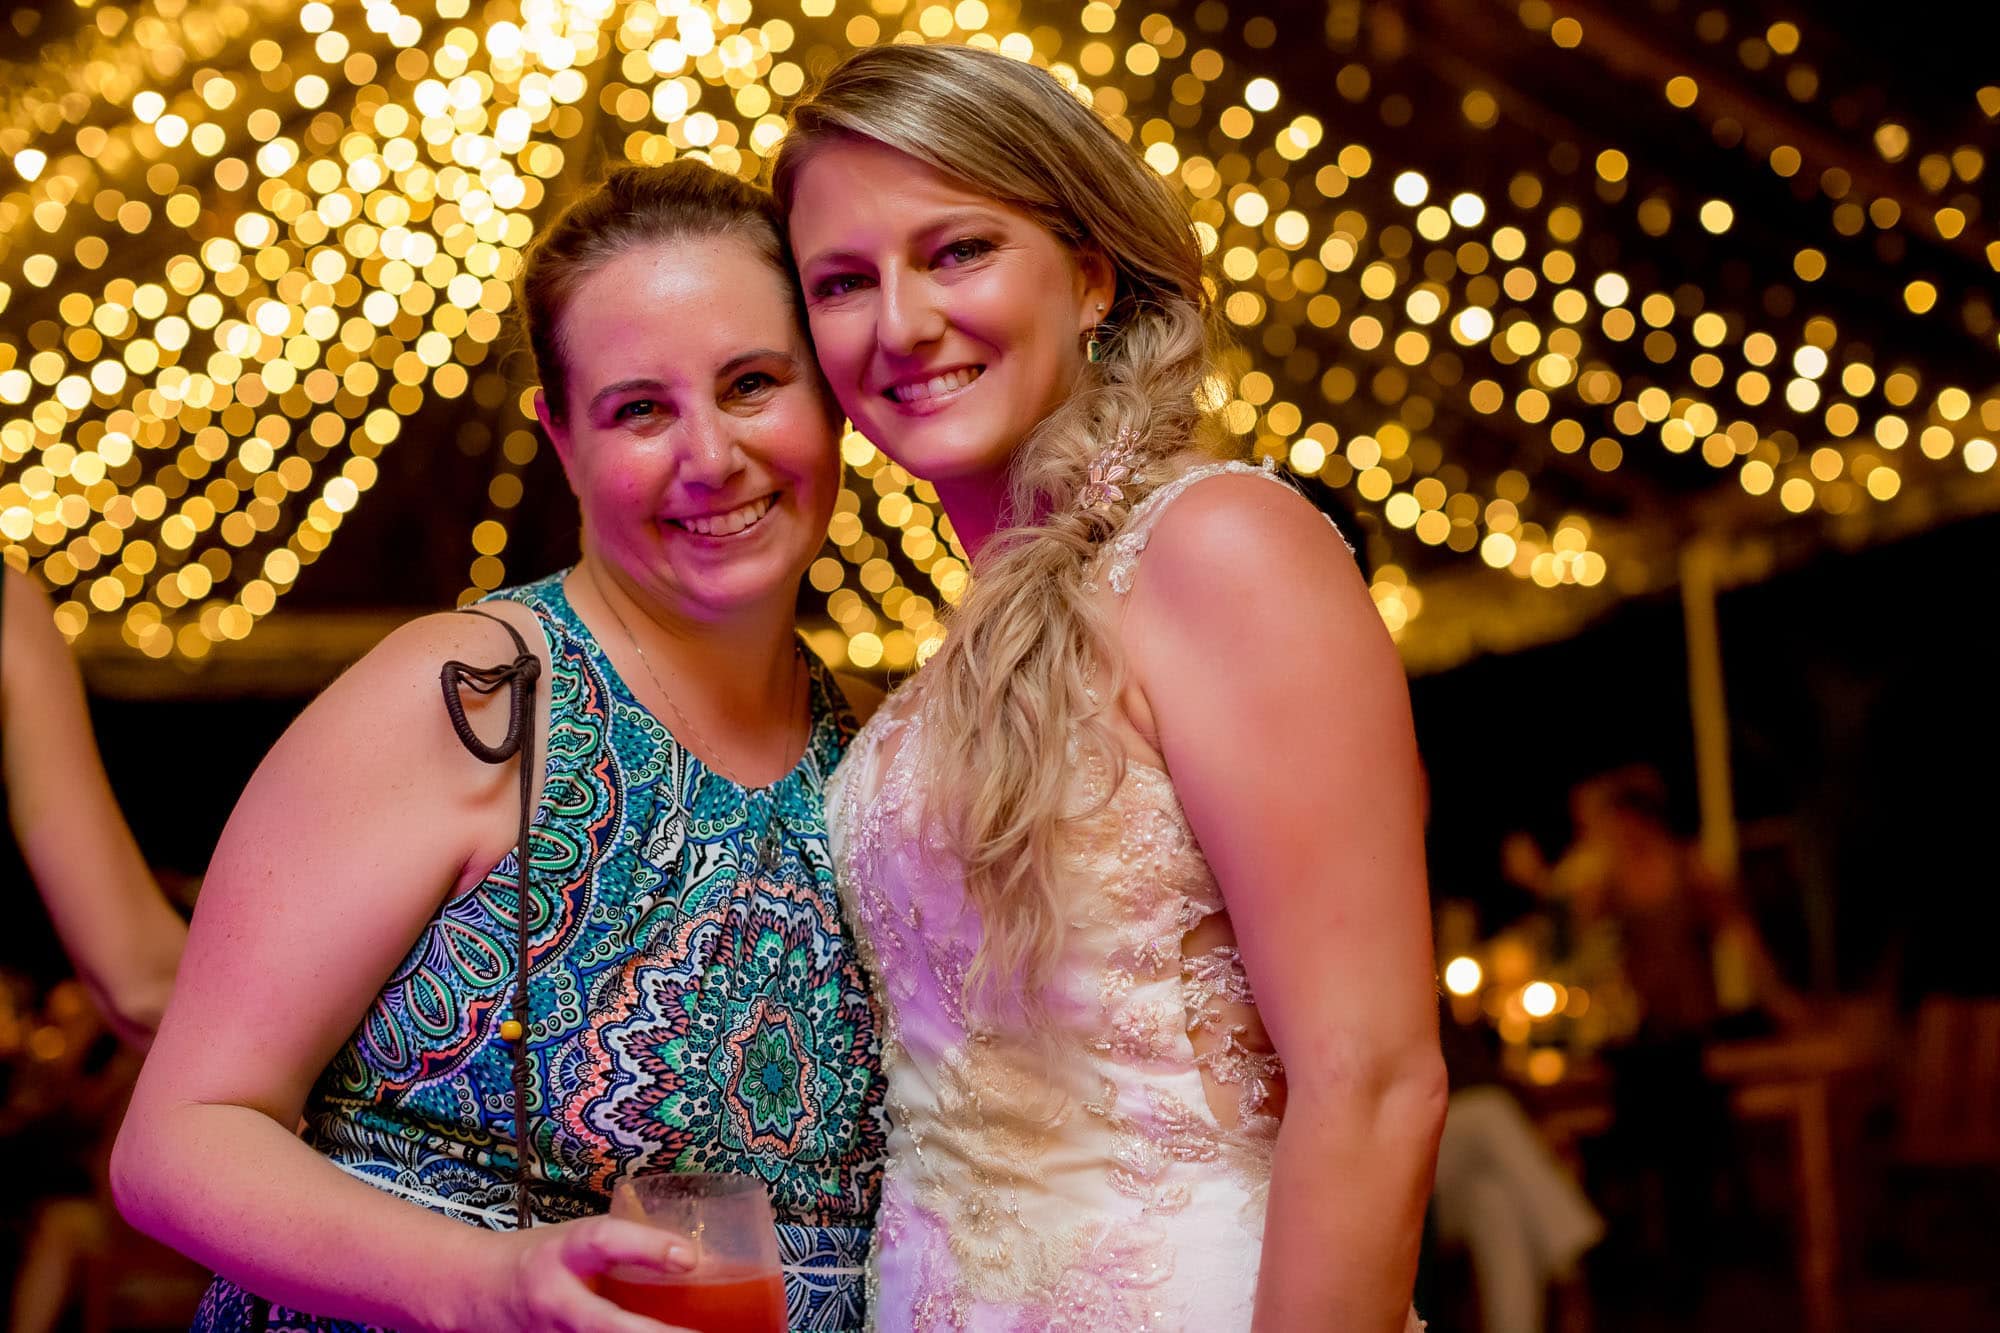 The bride and her friend at the beach wedding reception